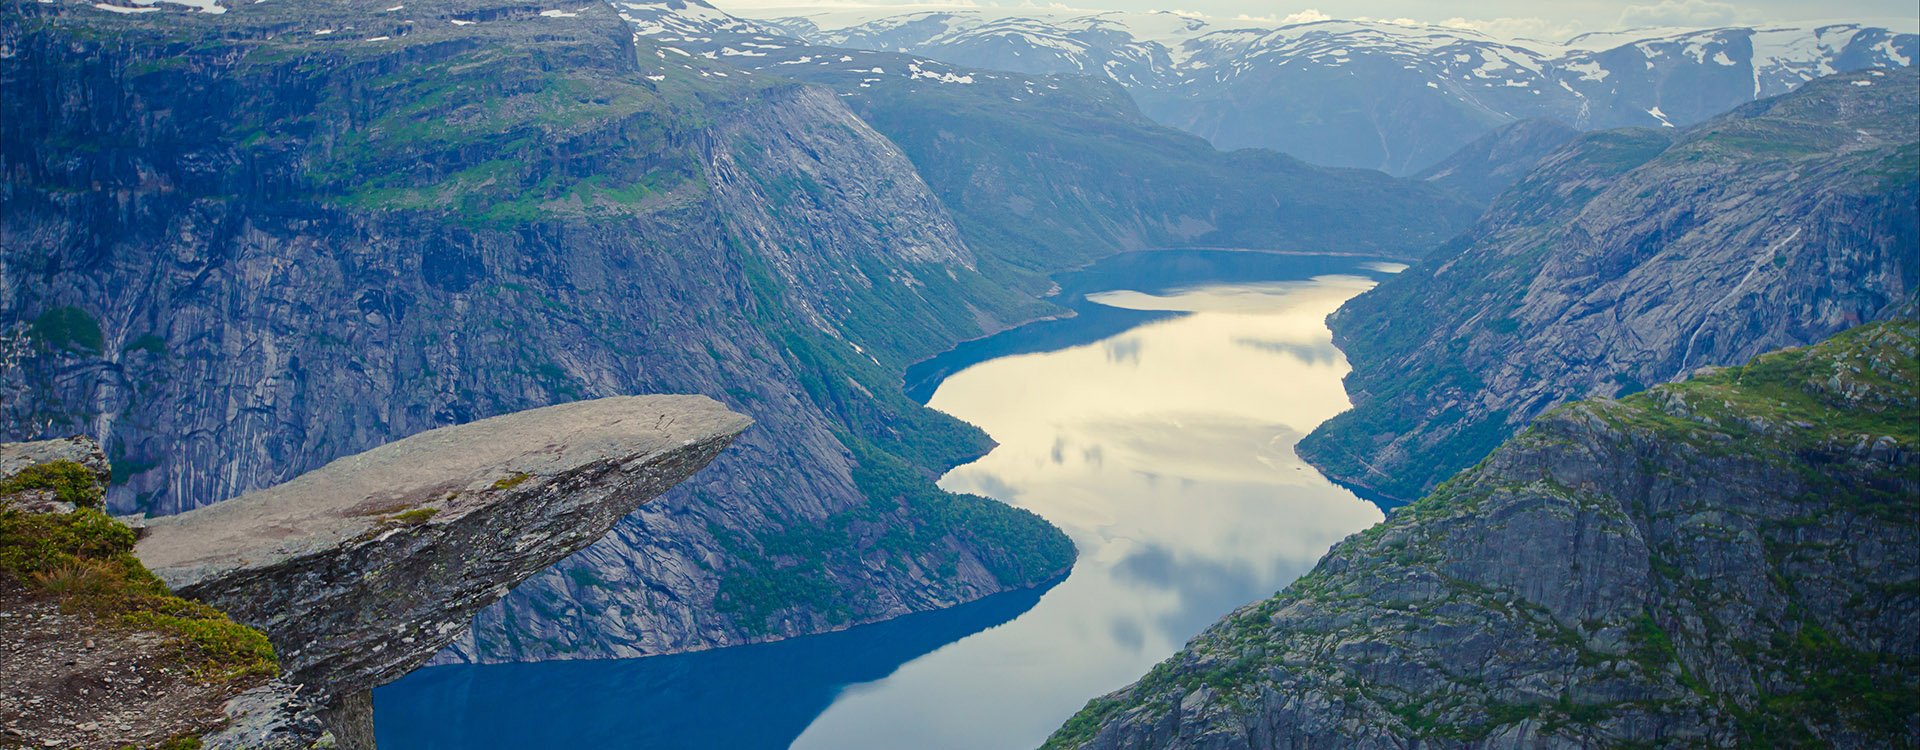 Norway Mountain Trolltunga Odda Fjord Norge Hiking Trail Waterfall The Troll Tongue Norge Scandinavia Nature Travel National Geographic Oslo Fjord